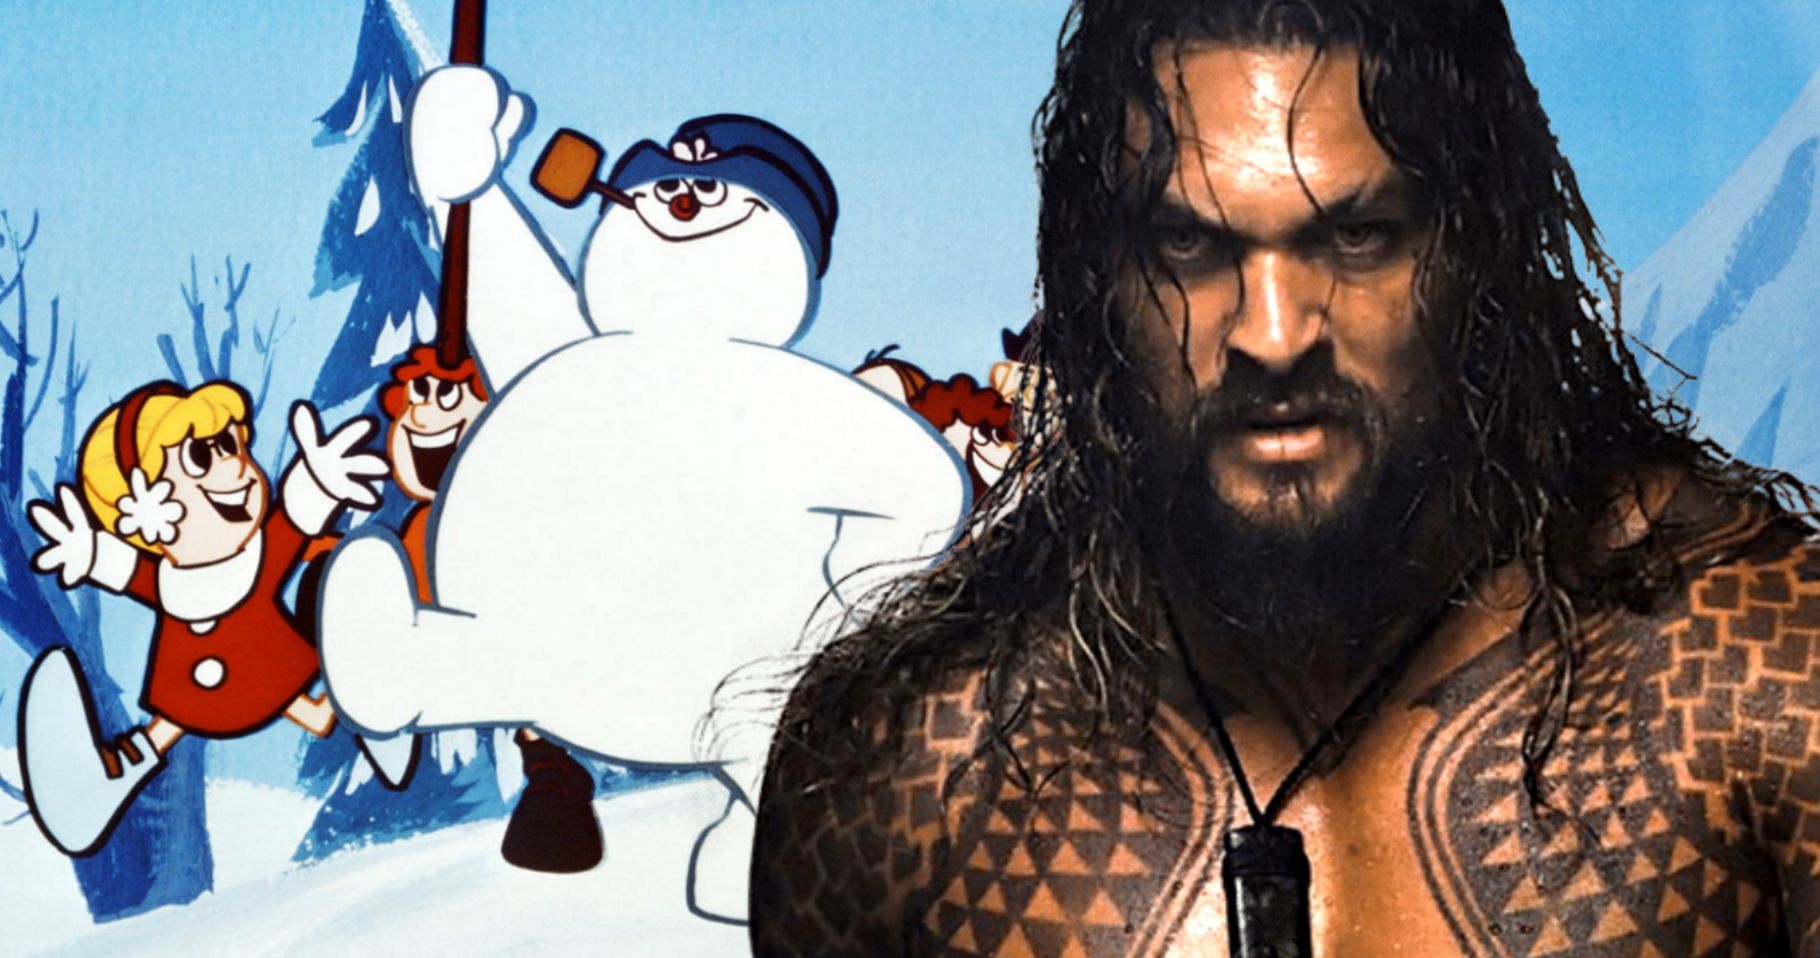 Jason Momoa Is Frosty the Snowman in New Live-Action Christmas Movie